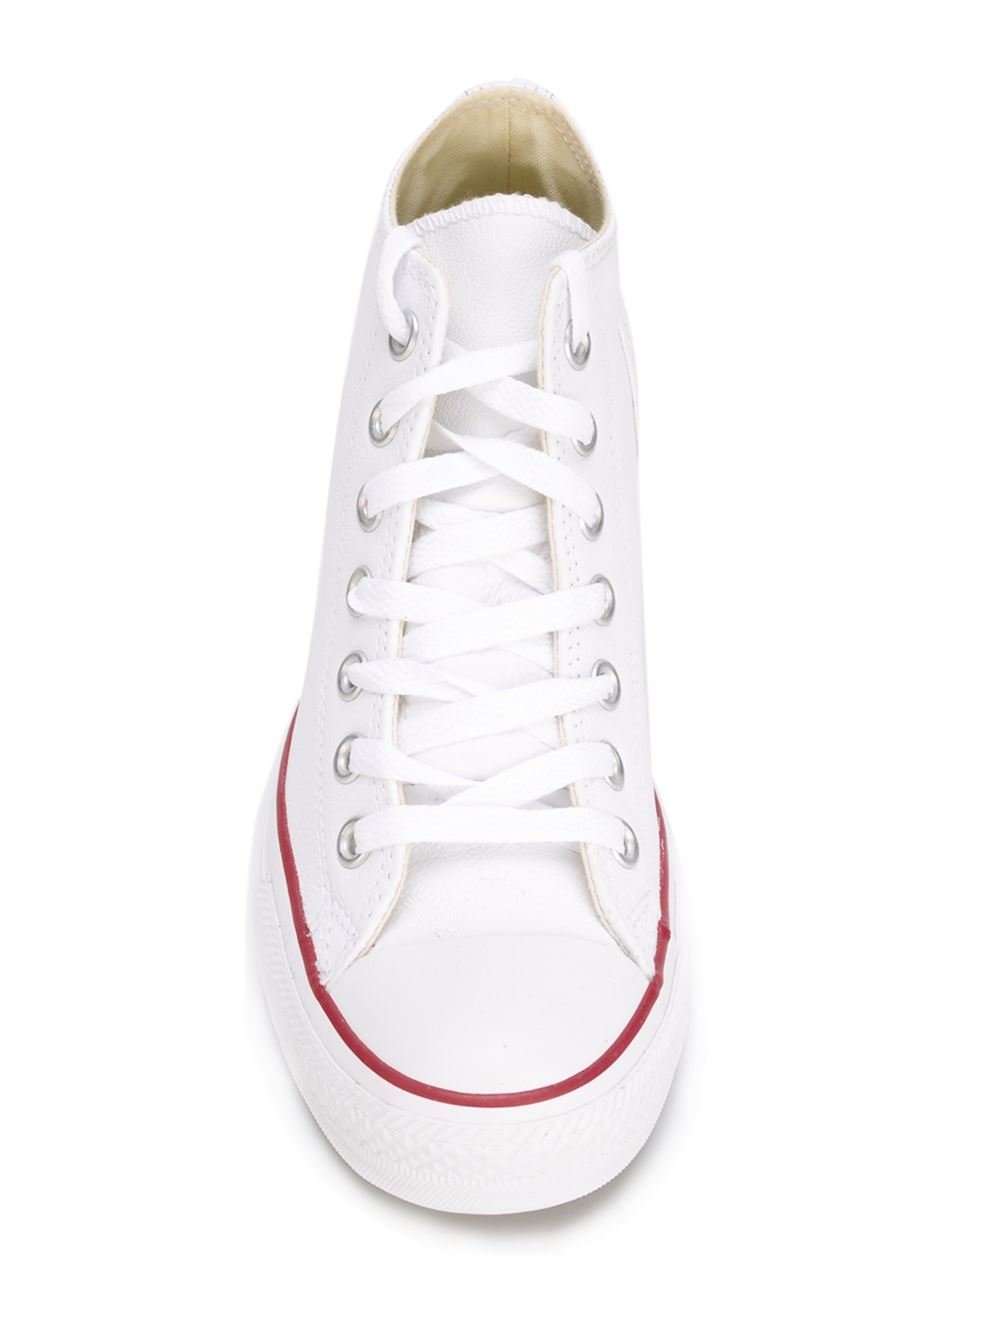 Converse 'chuck Taylor All Star Lux Wedge' Sneakers in White | Lyst